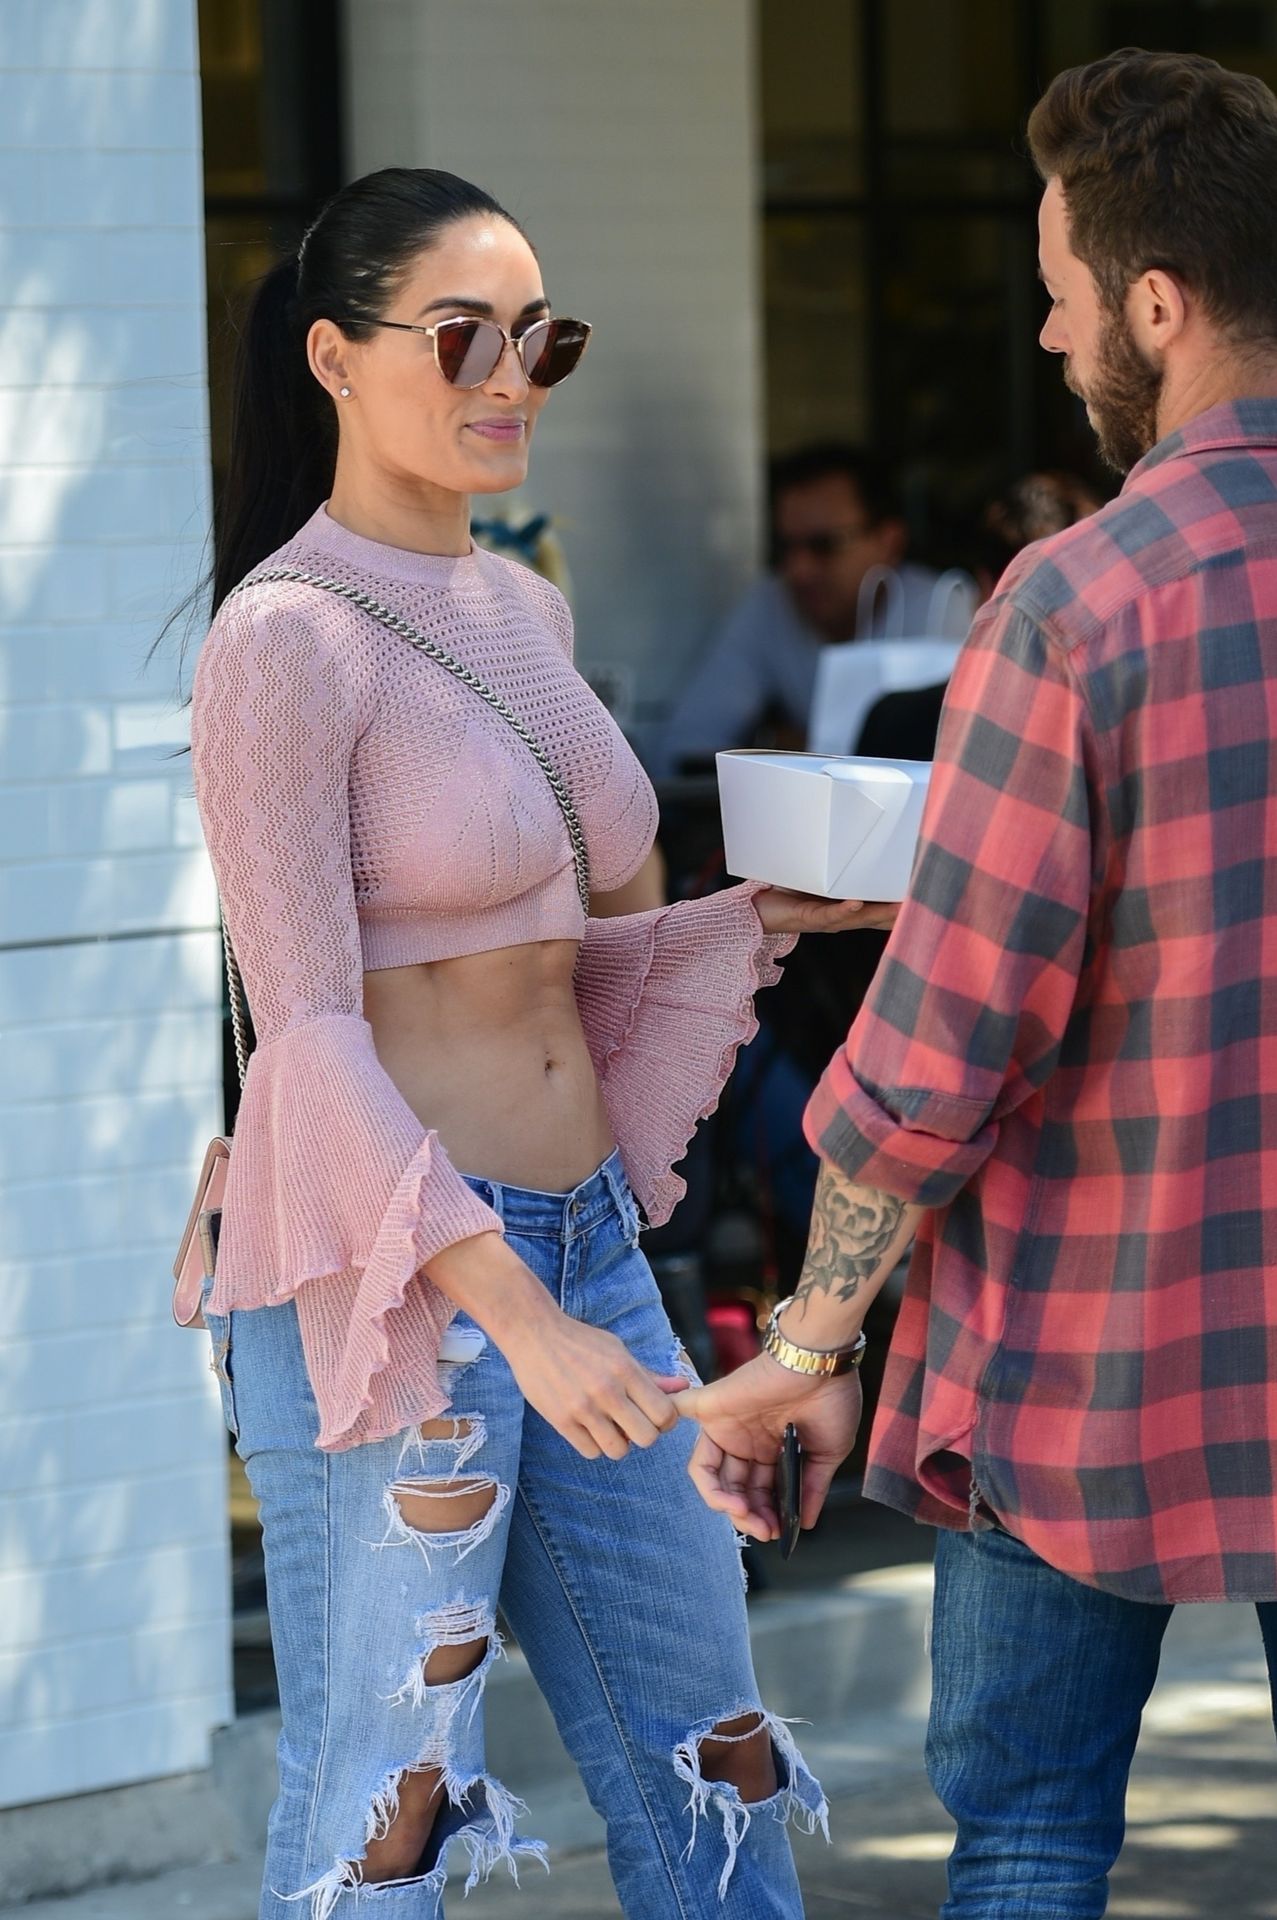 Image NB (9) in Nikki Bella shows off her ripped abs in a pink crop top and...